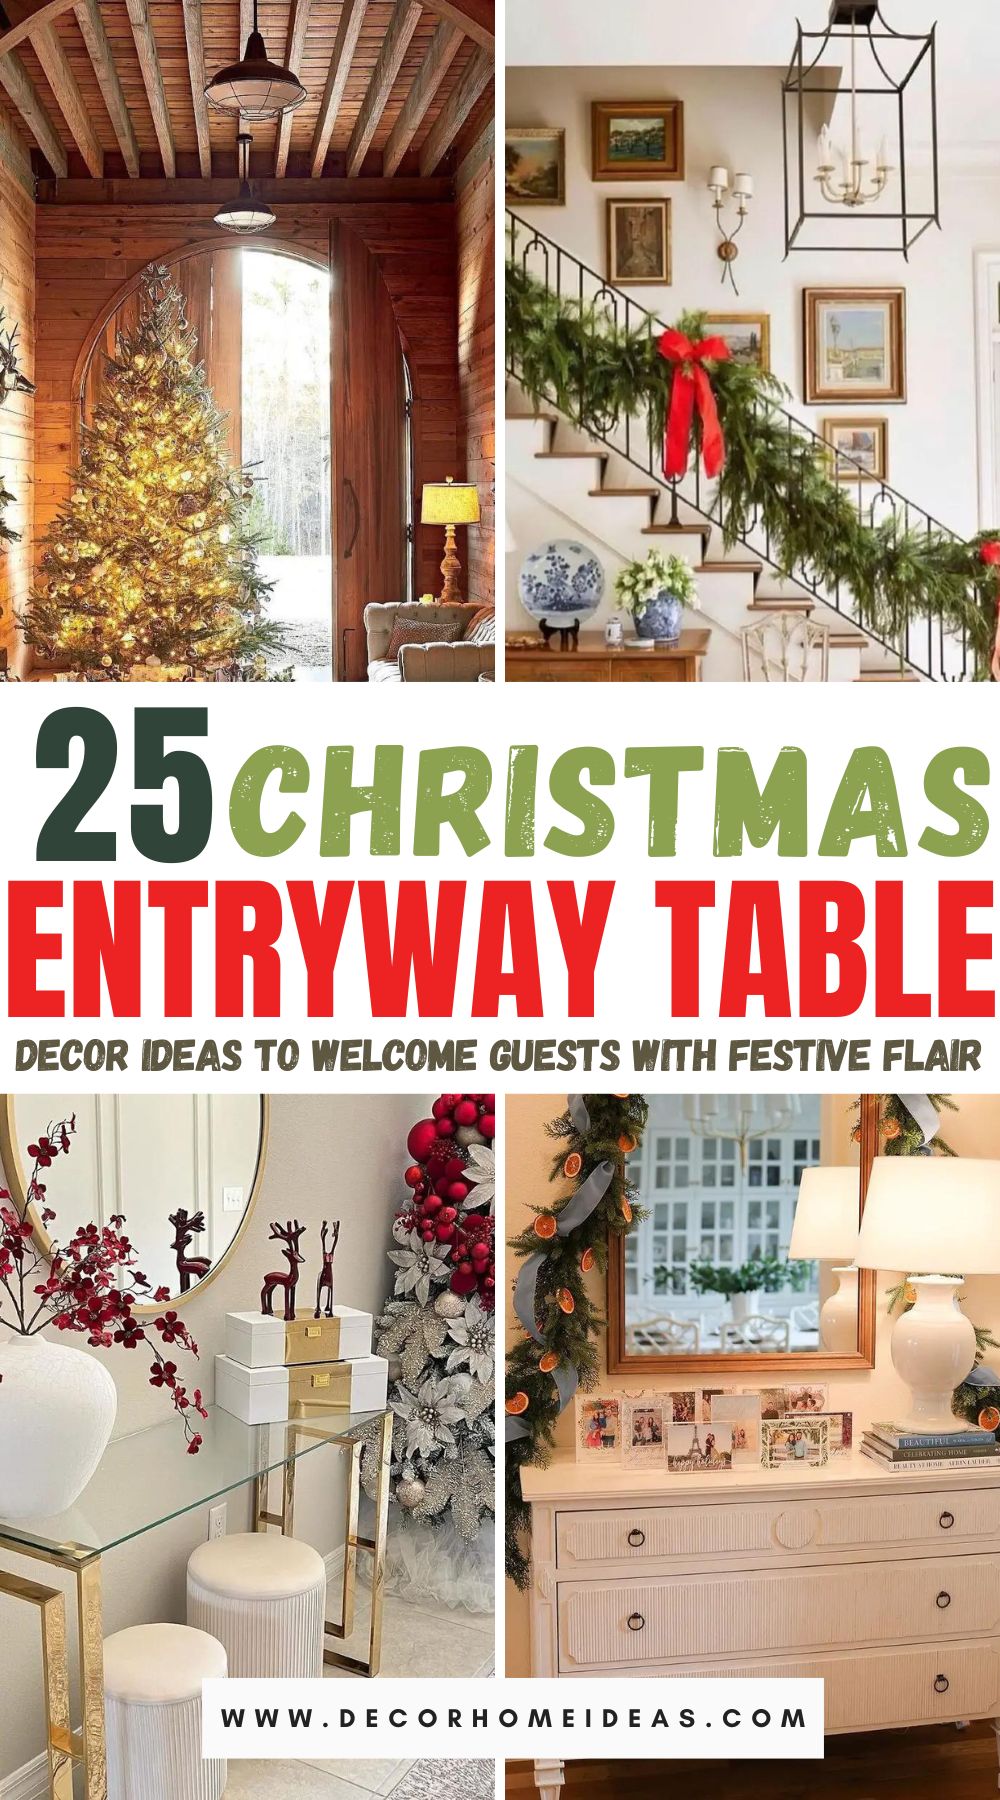 Elevate your entryway with 25 enchanting Christmas decor ideas for your table, creating a warm and inviting welcome for your holiday guests. From shimmering candle arrangements to lush greenery, discover inspiration to adorn your entryway table with seasonal charm and elegance.